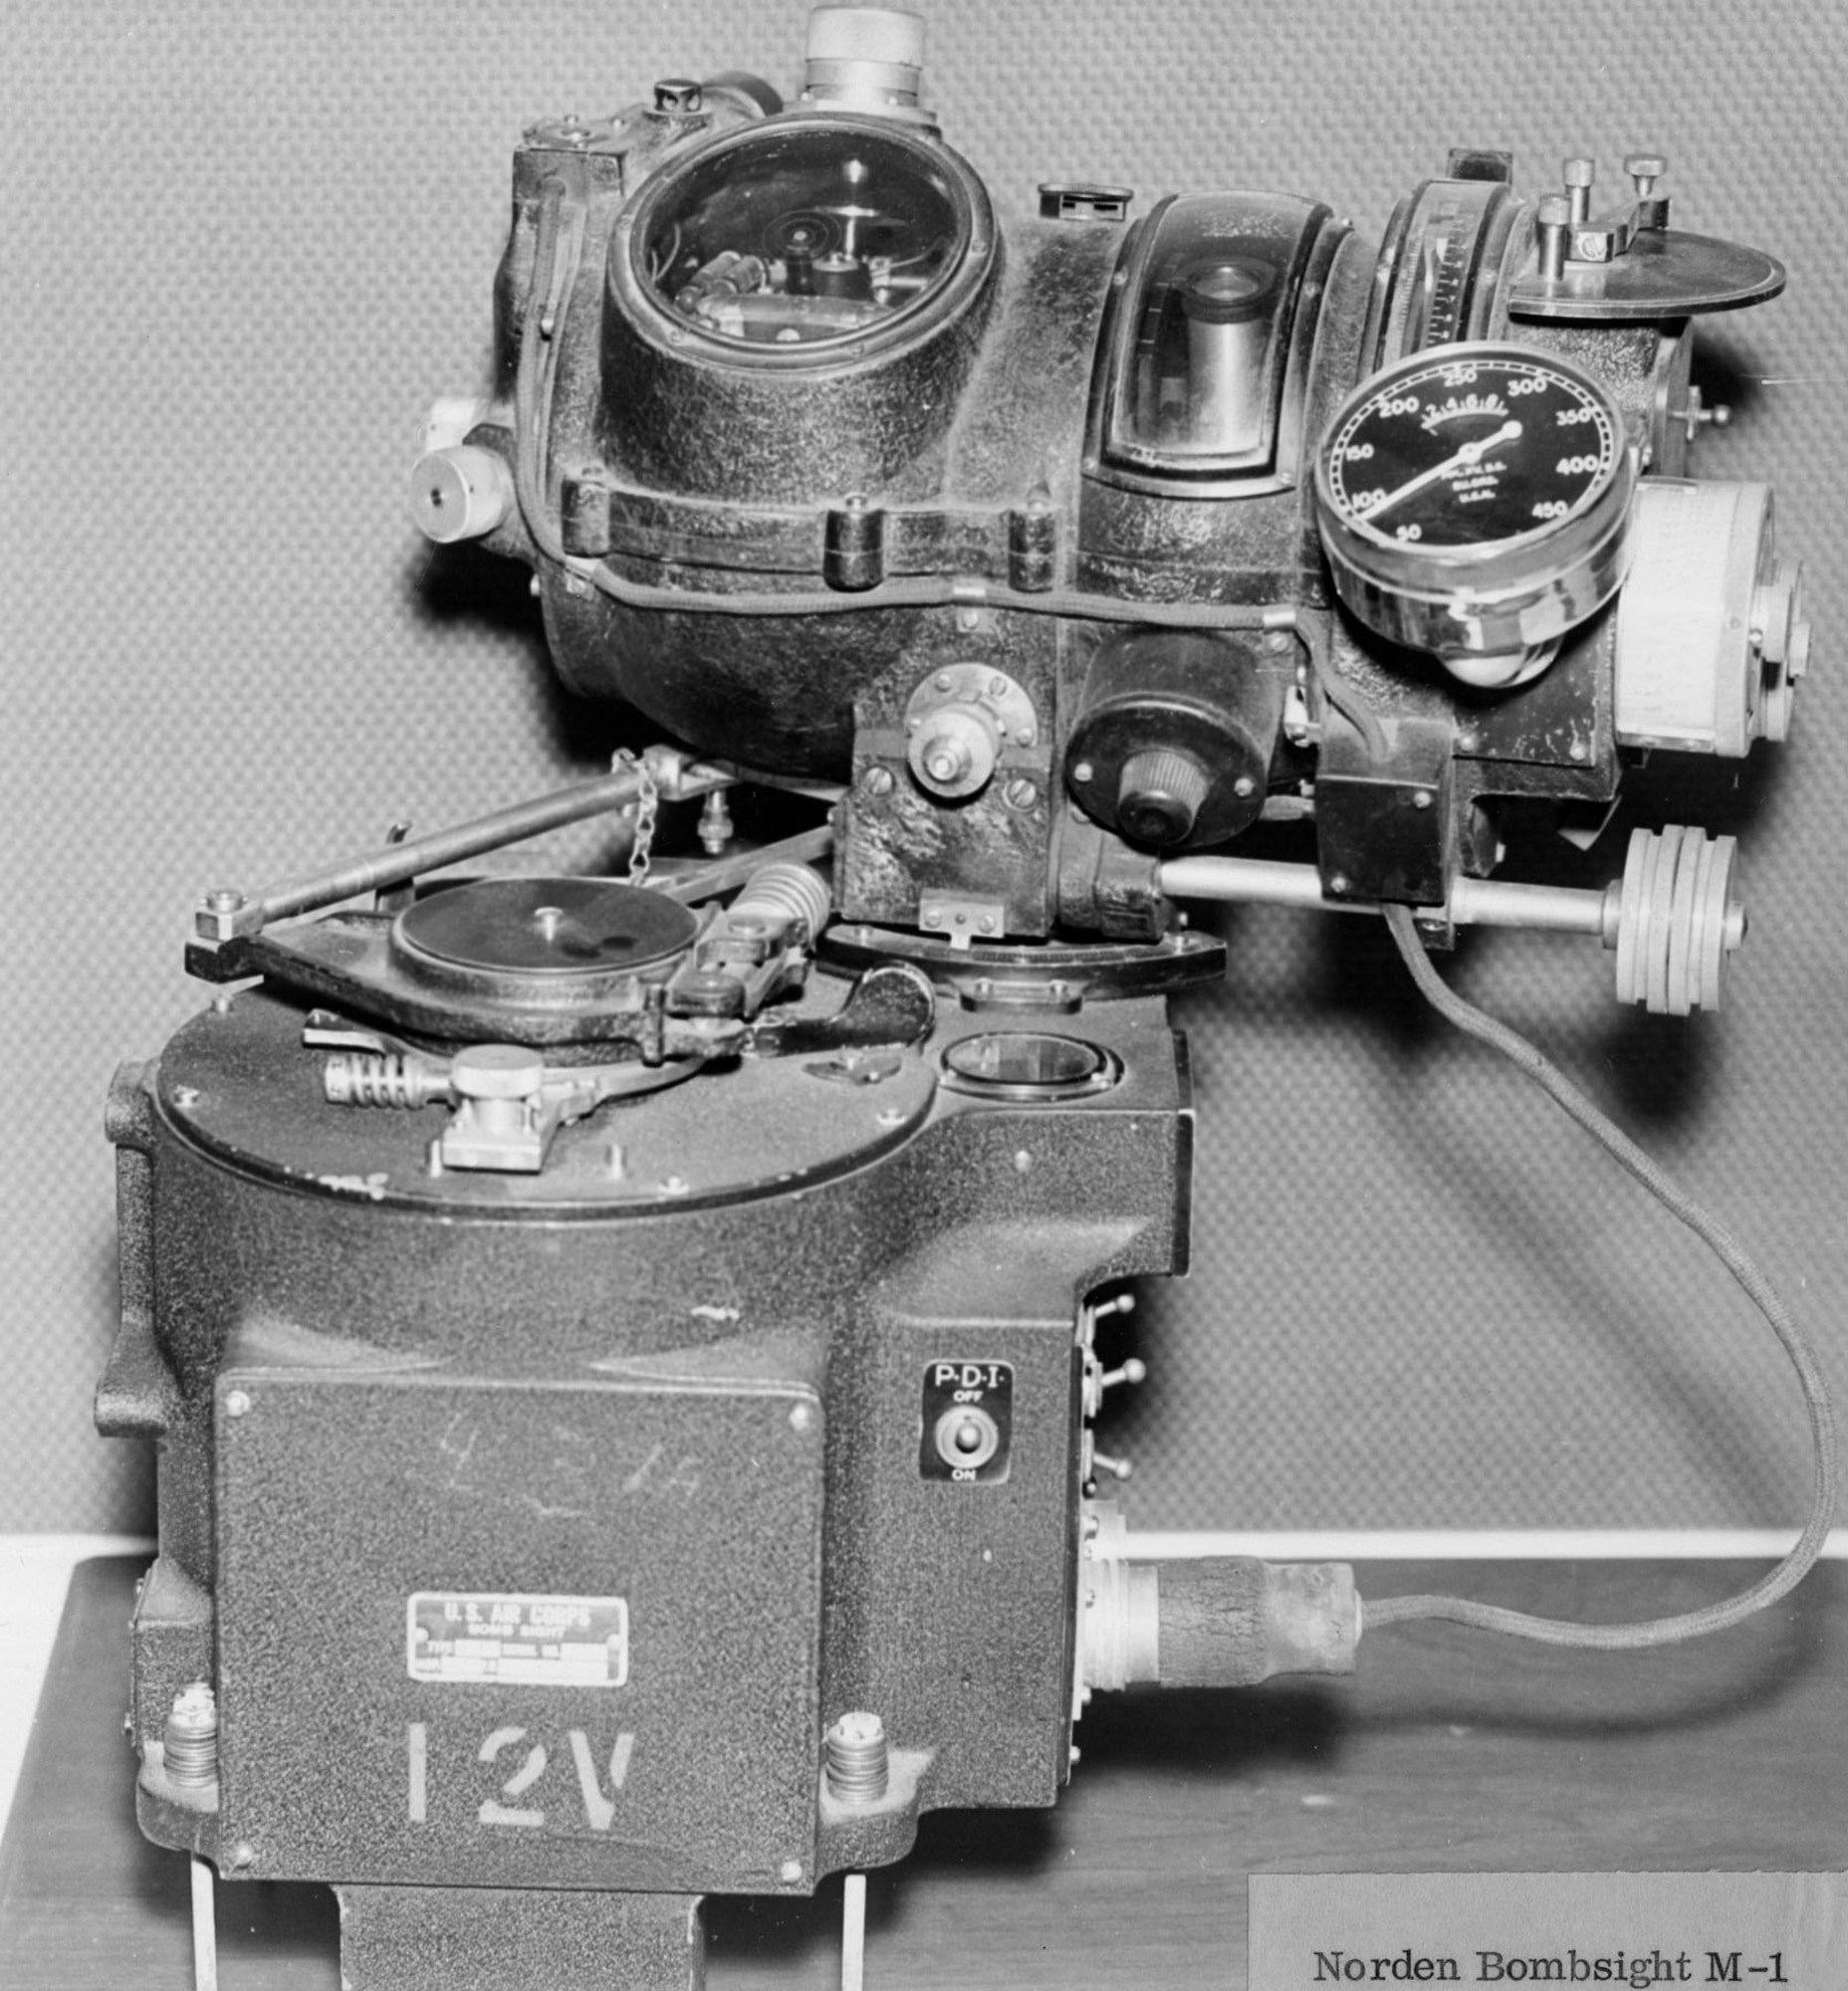 In 1932, the Army acquired the Norden M-1 bombsight. Developed for the U.S. Navy, the Norden bombsight became the U.S. Army Air Forces’ premier, high-altitude bombsight in WW II. (U.S. Air Force photo)